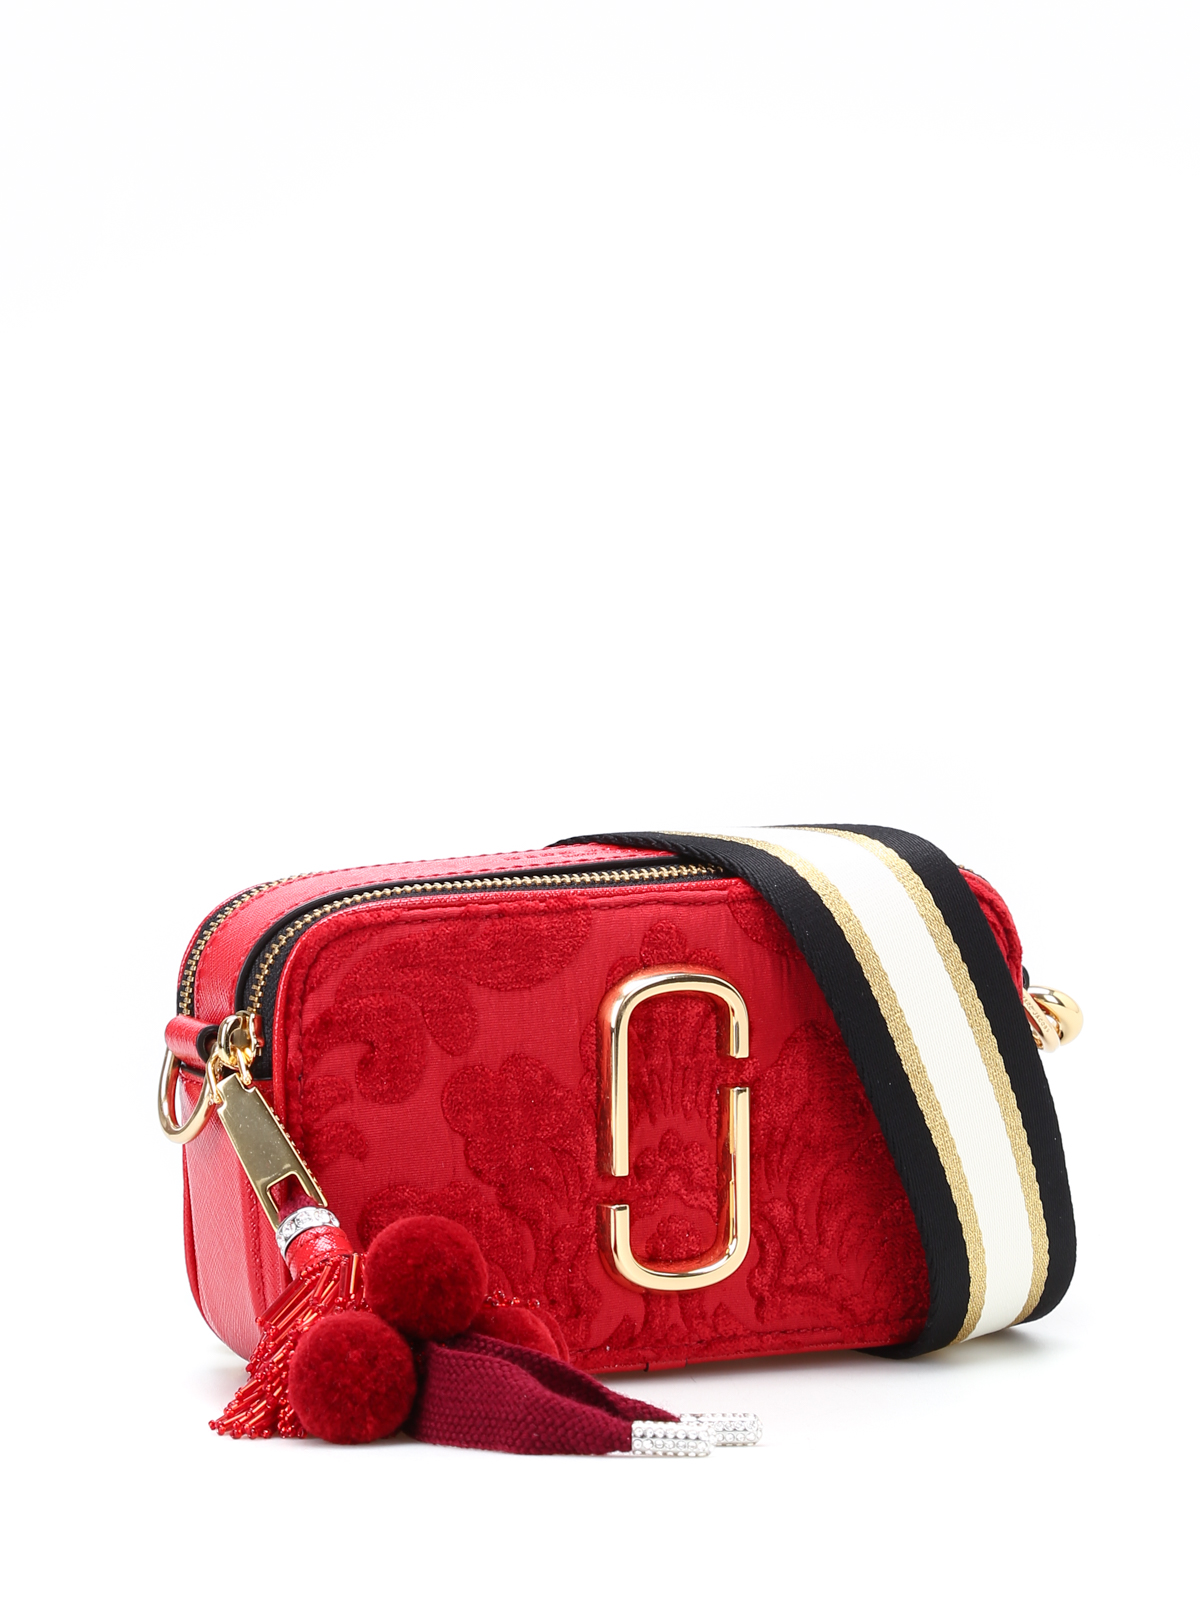 Women's The Snapshot Small Camera Bag by Marc Jacobs